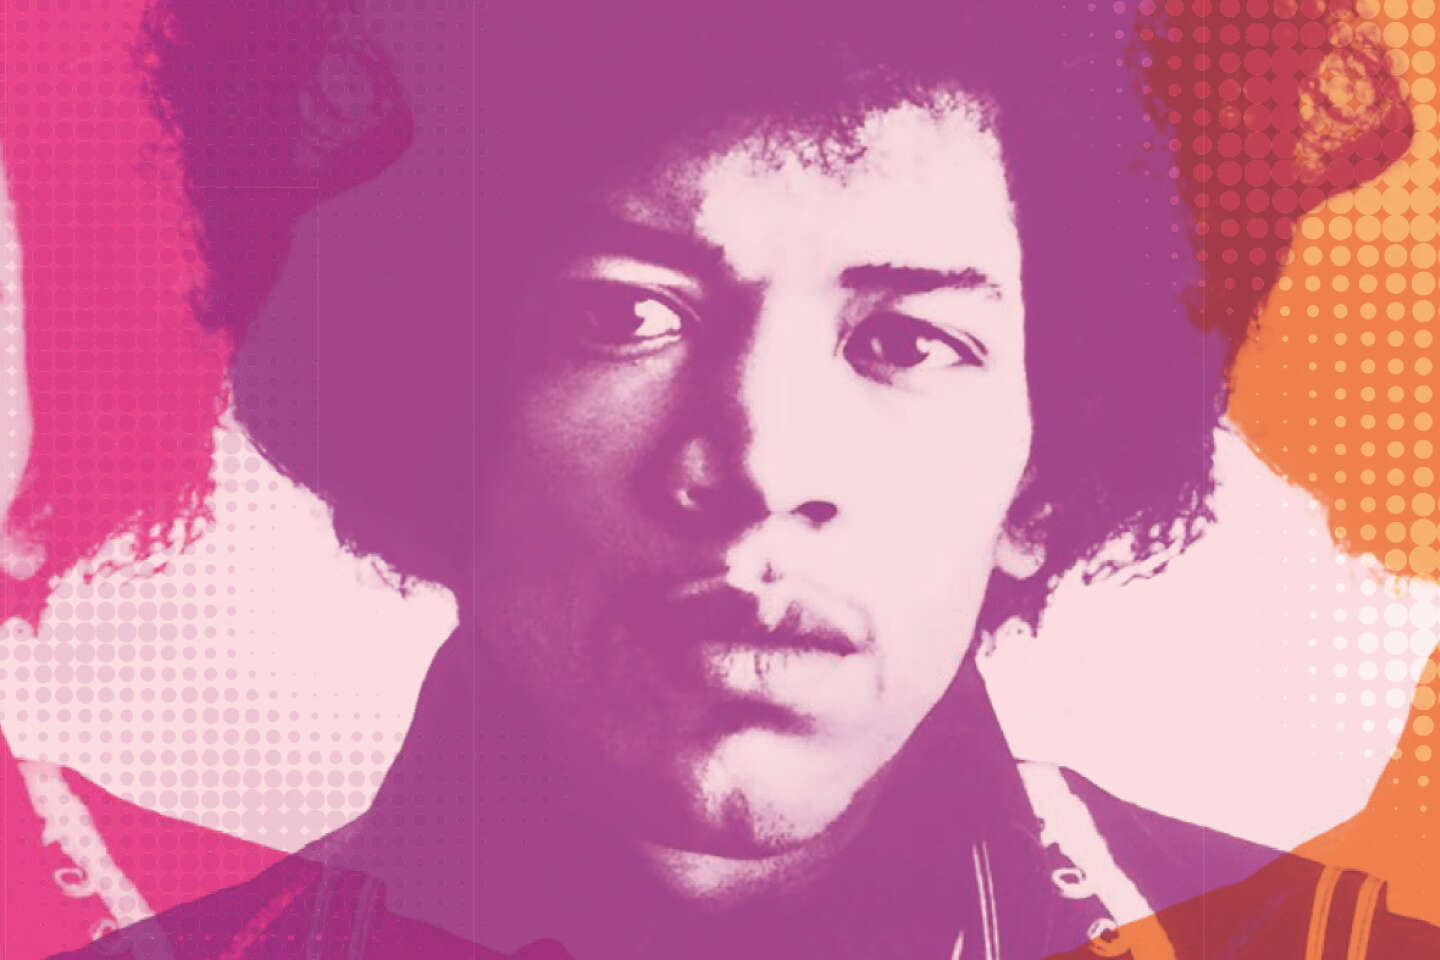 from Jimi Hendrix to Bach and from Musette to Gwerz